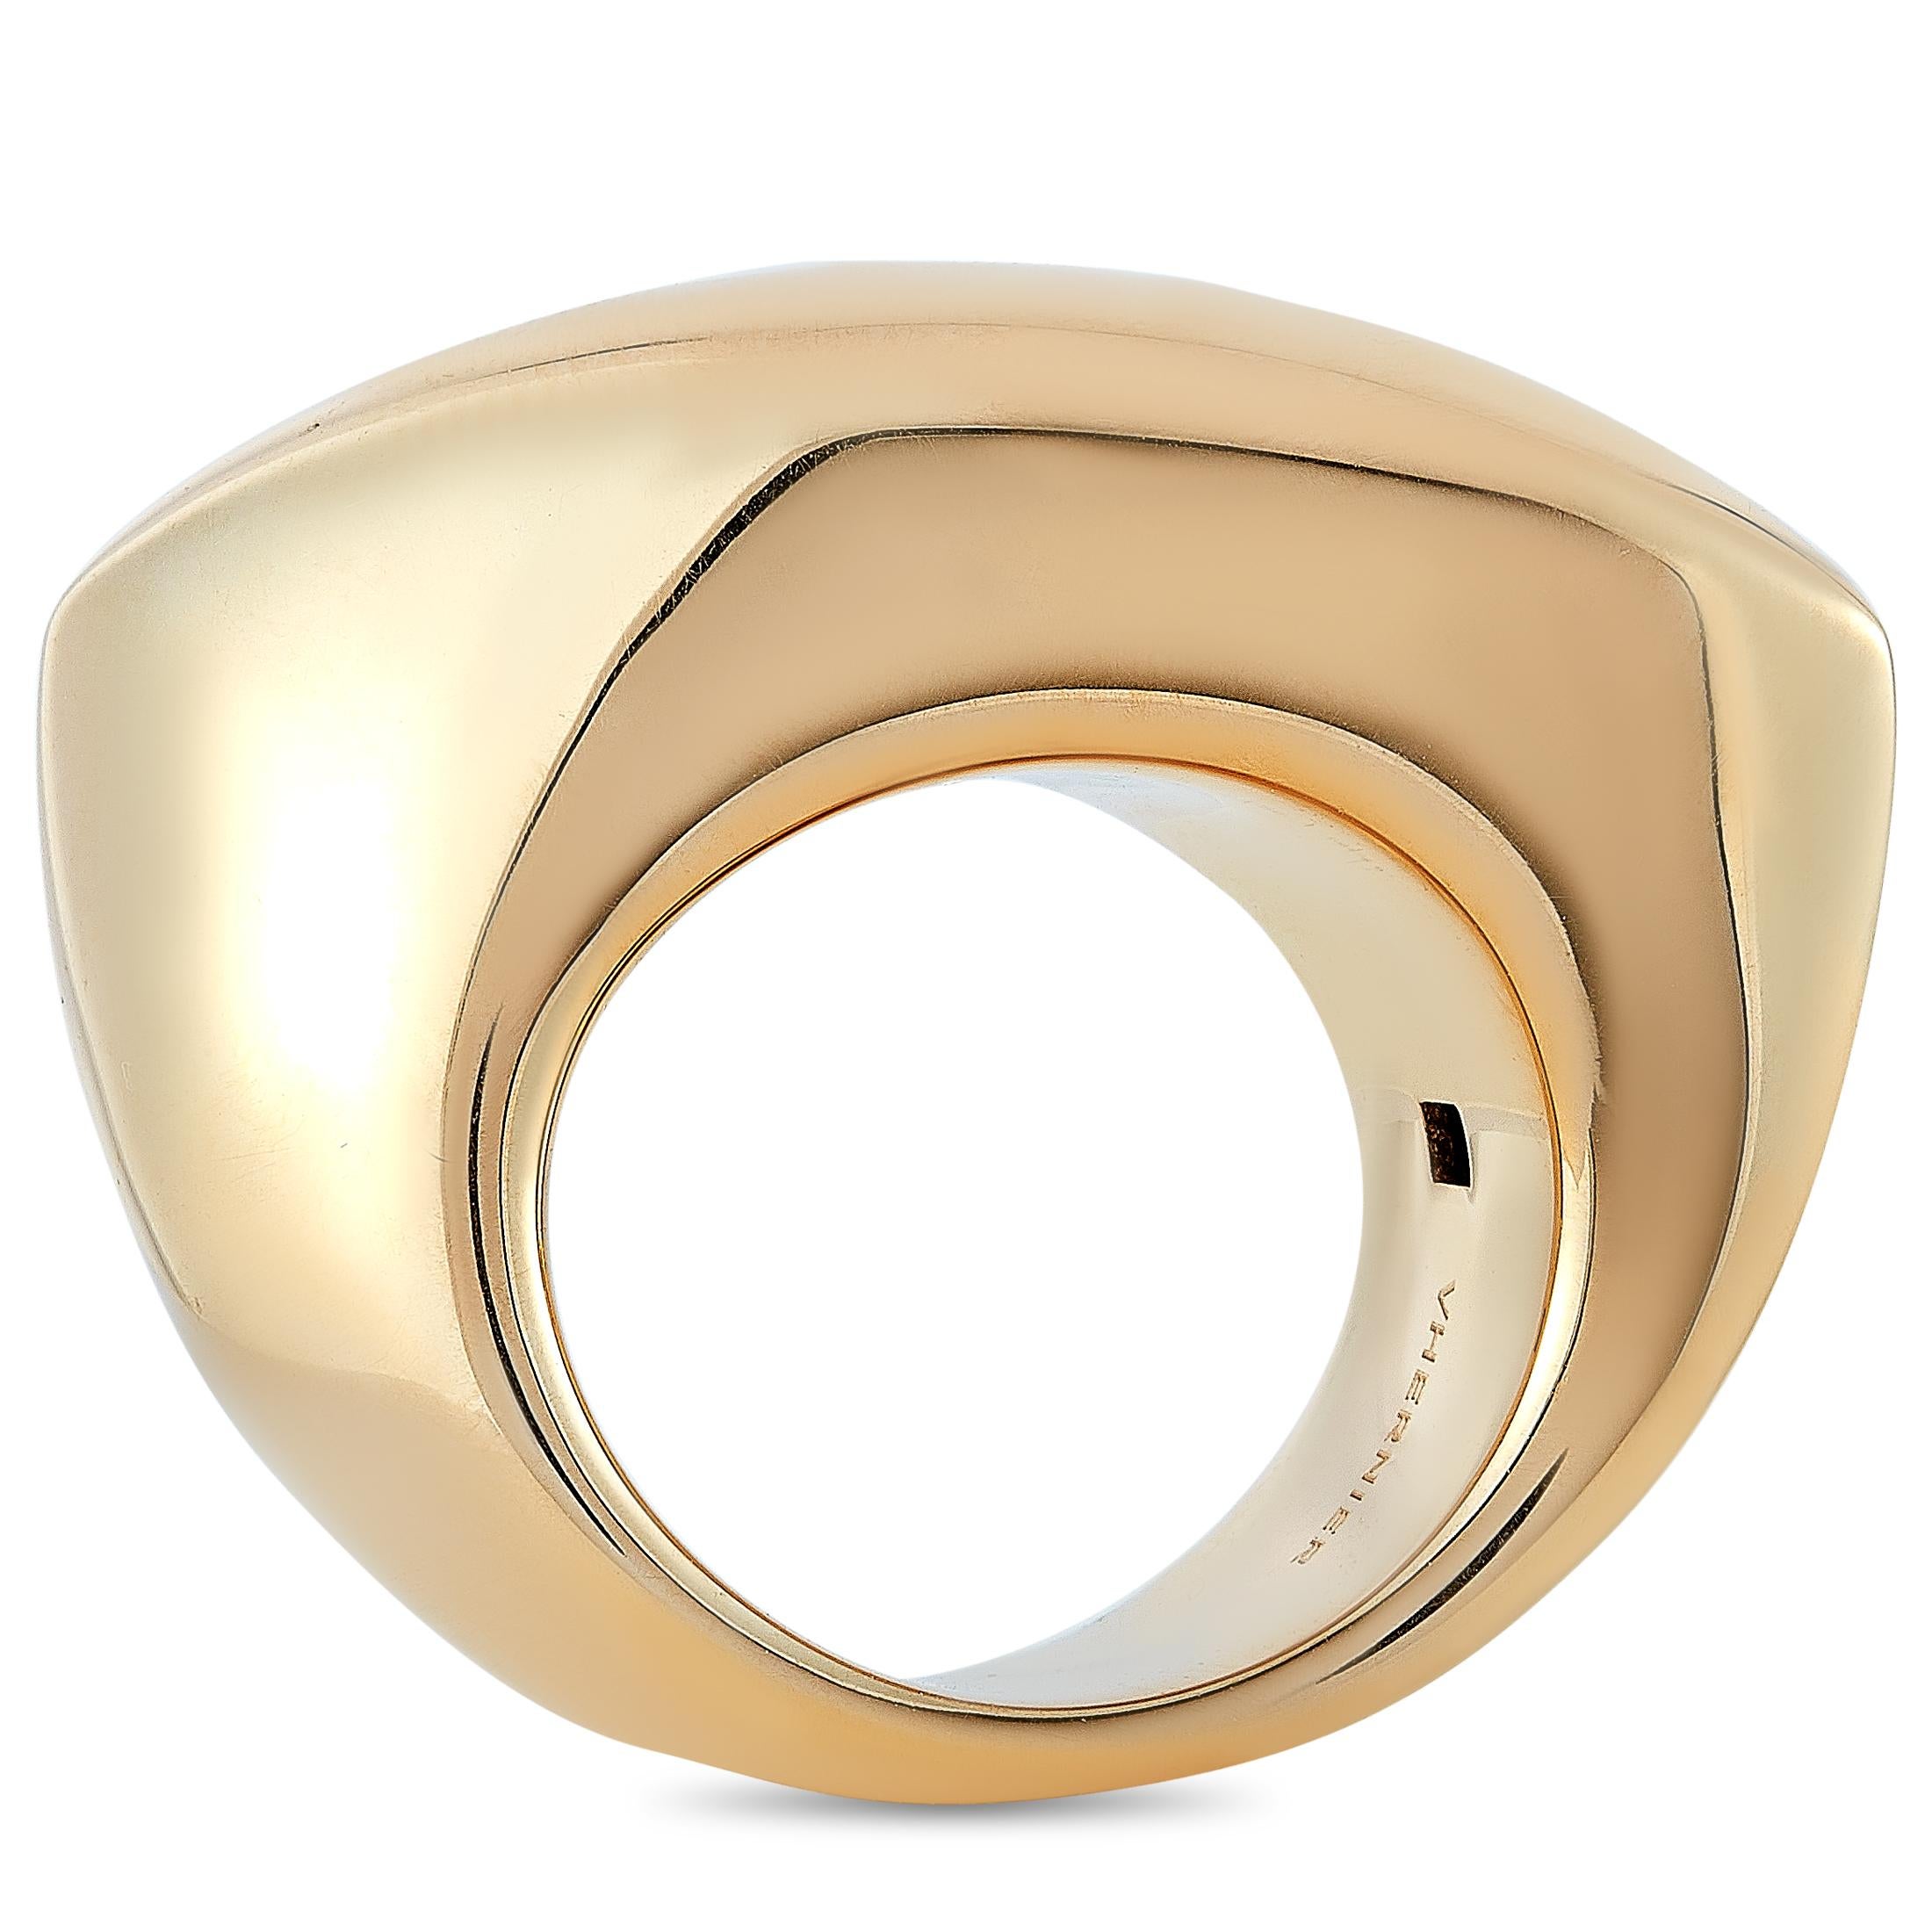 The Vhernier “Fuseau” ring is crafted from 18K rose gold and weighs 13.8 grams, boasting band thickness of 9 mm and top height of 9 mm.
Ring Size: 6.5

This item is offered in brand new condition and includes the manufacturer’s box.